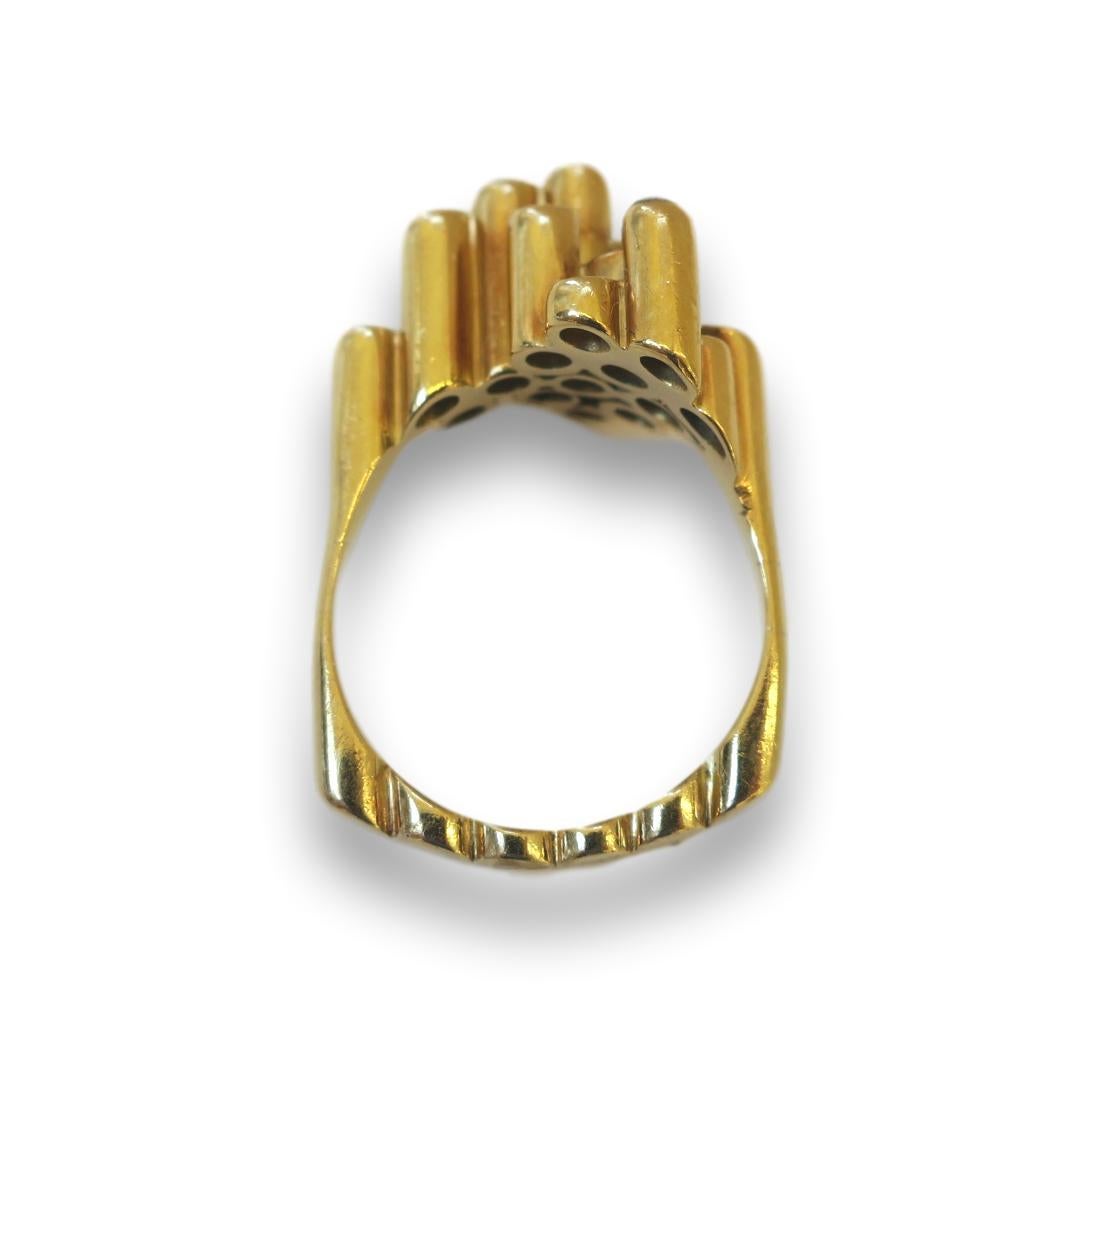 Geometric yellow gold and diamond 1970's ring. The 1/2